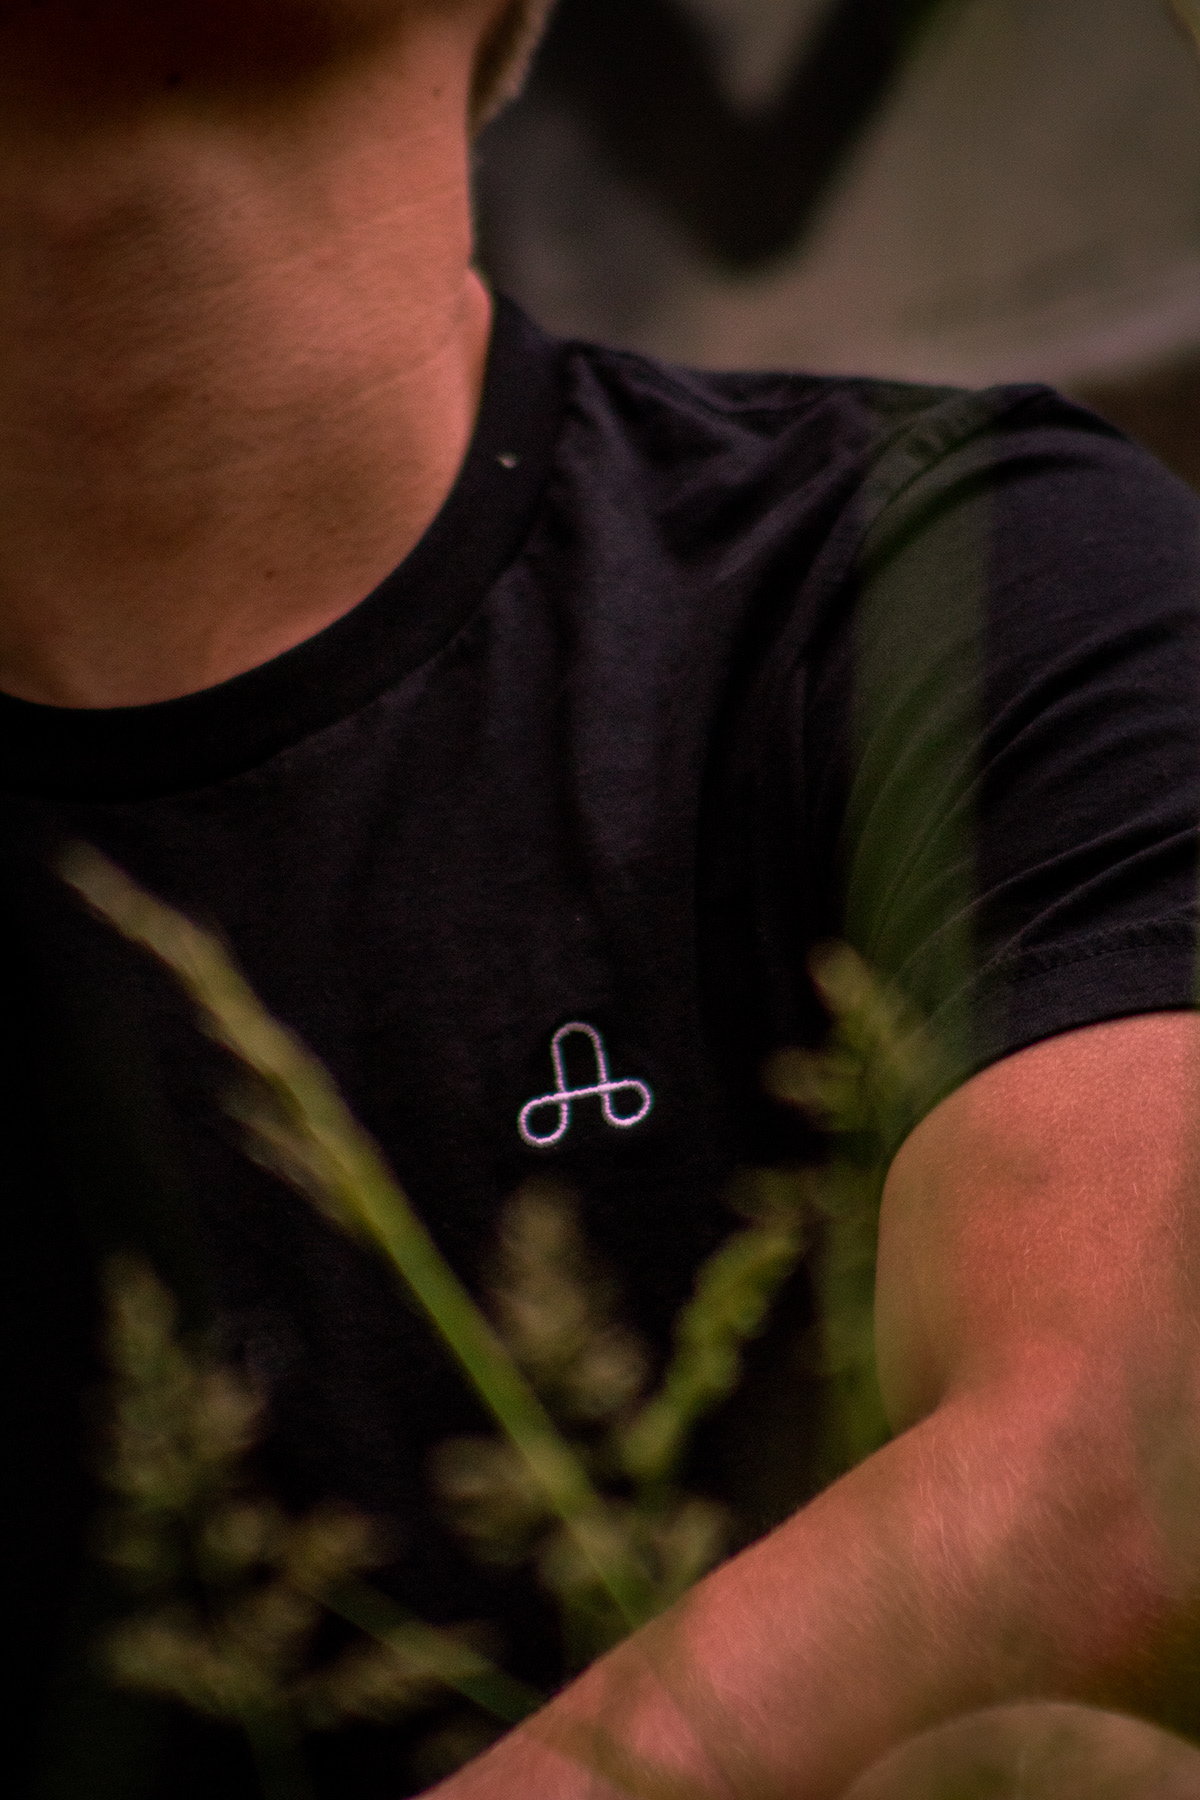 A close up shot of a model wearing The Uprising T-shirt focusing on the embroidered logo.